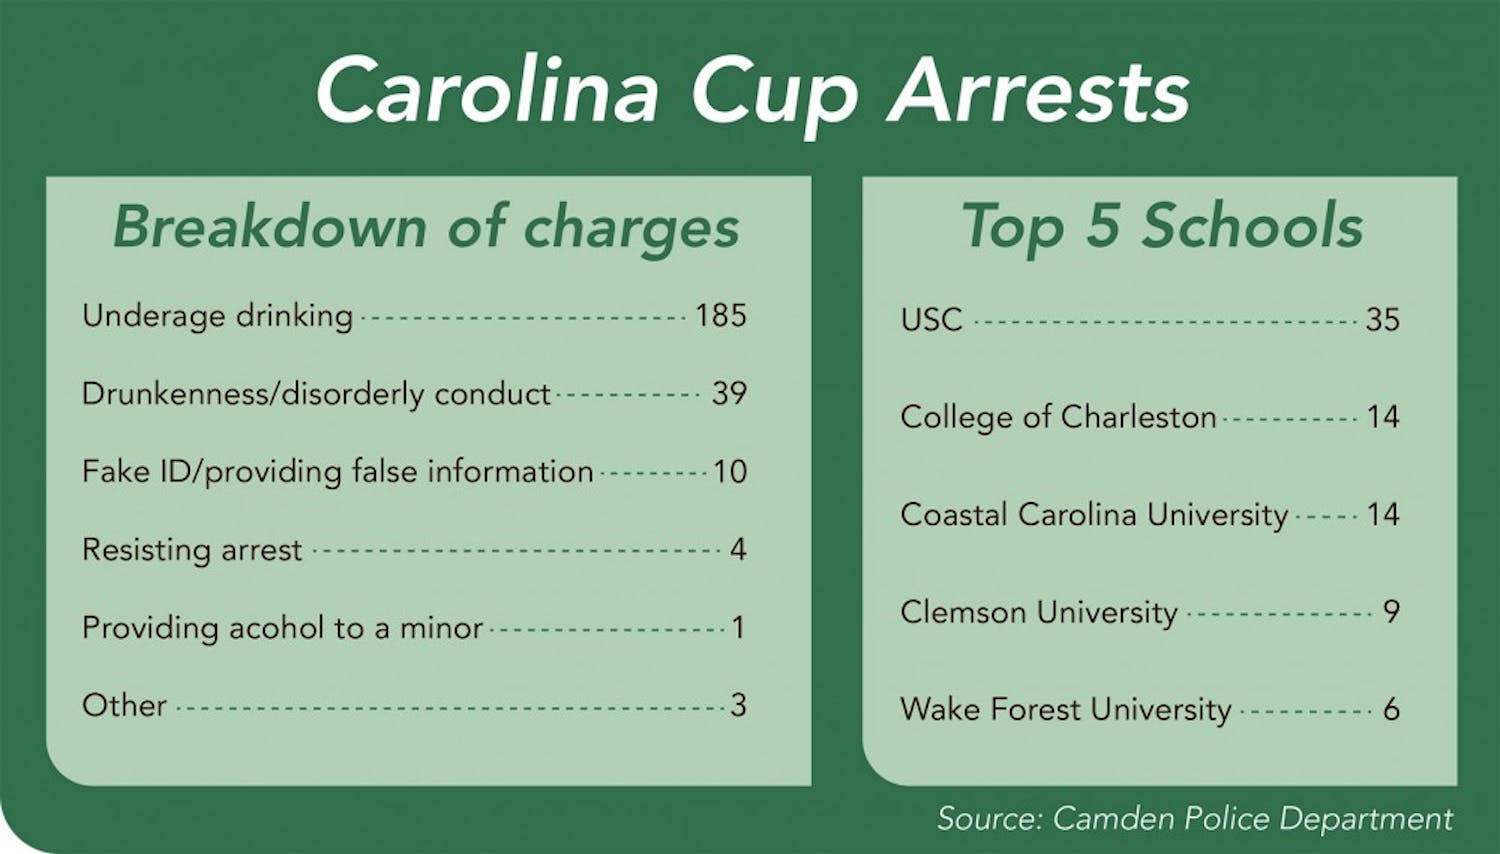 	USC had the most students arrested out of the colleges represented at Carolina Cup Saturday.